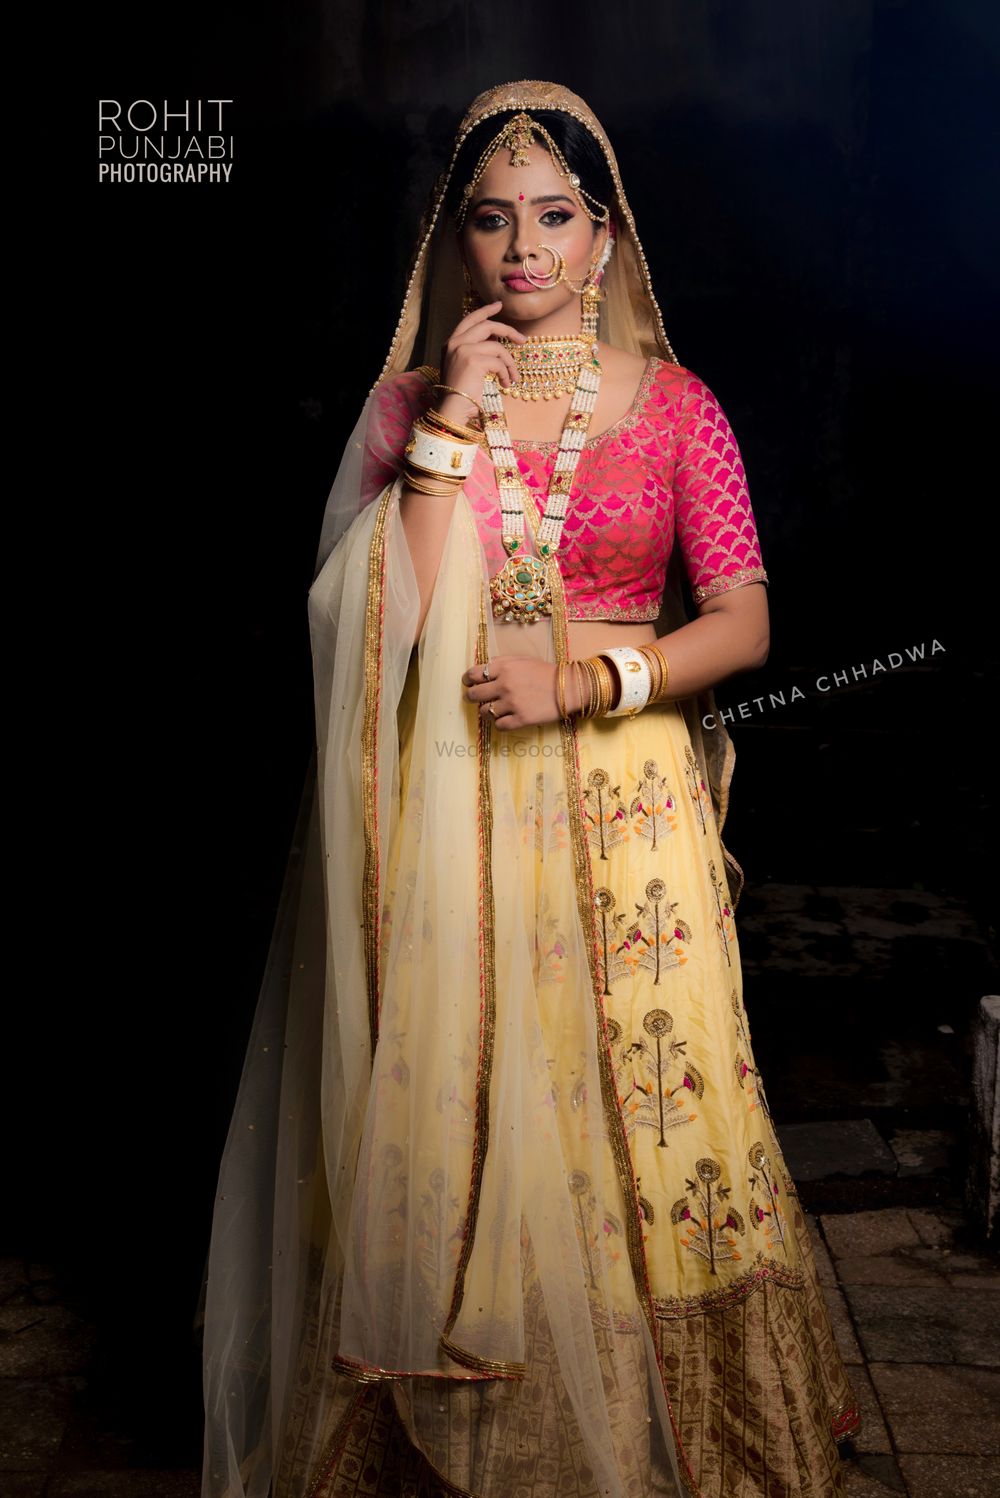 Photo From The CK Muse - By Chetna Chhadwas Bridal World